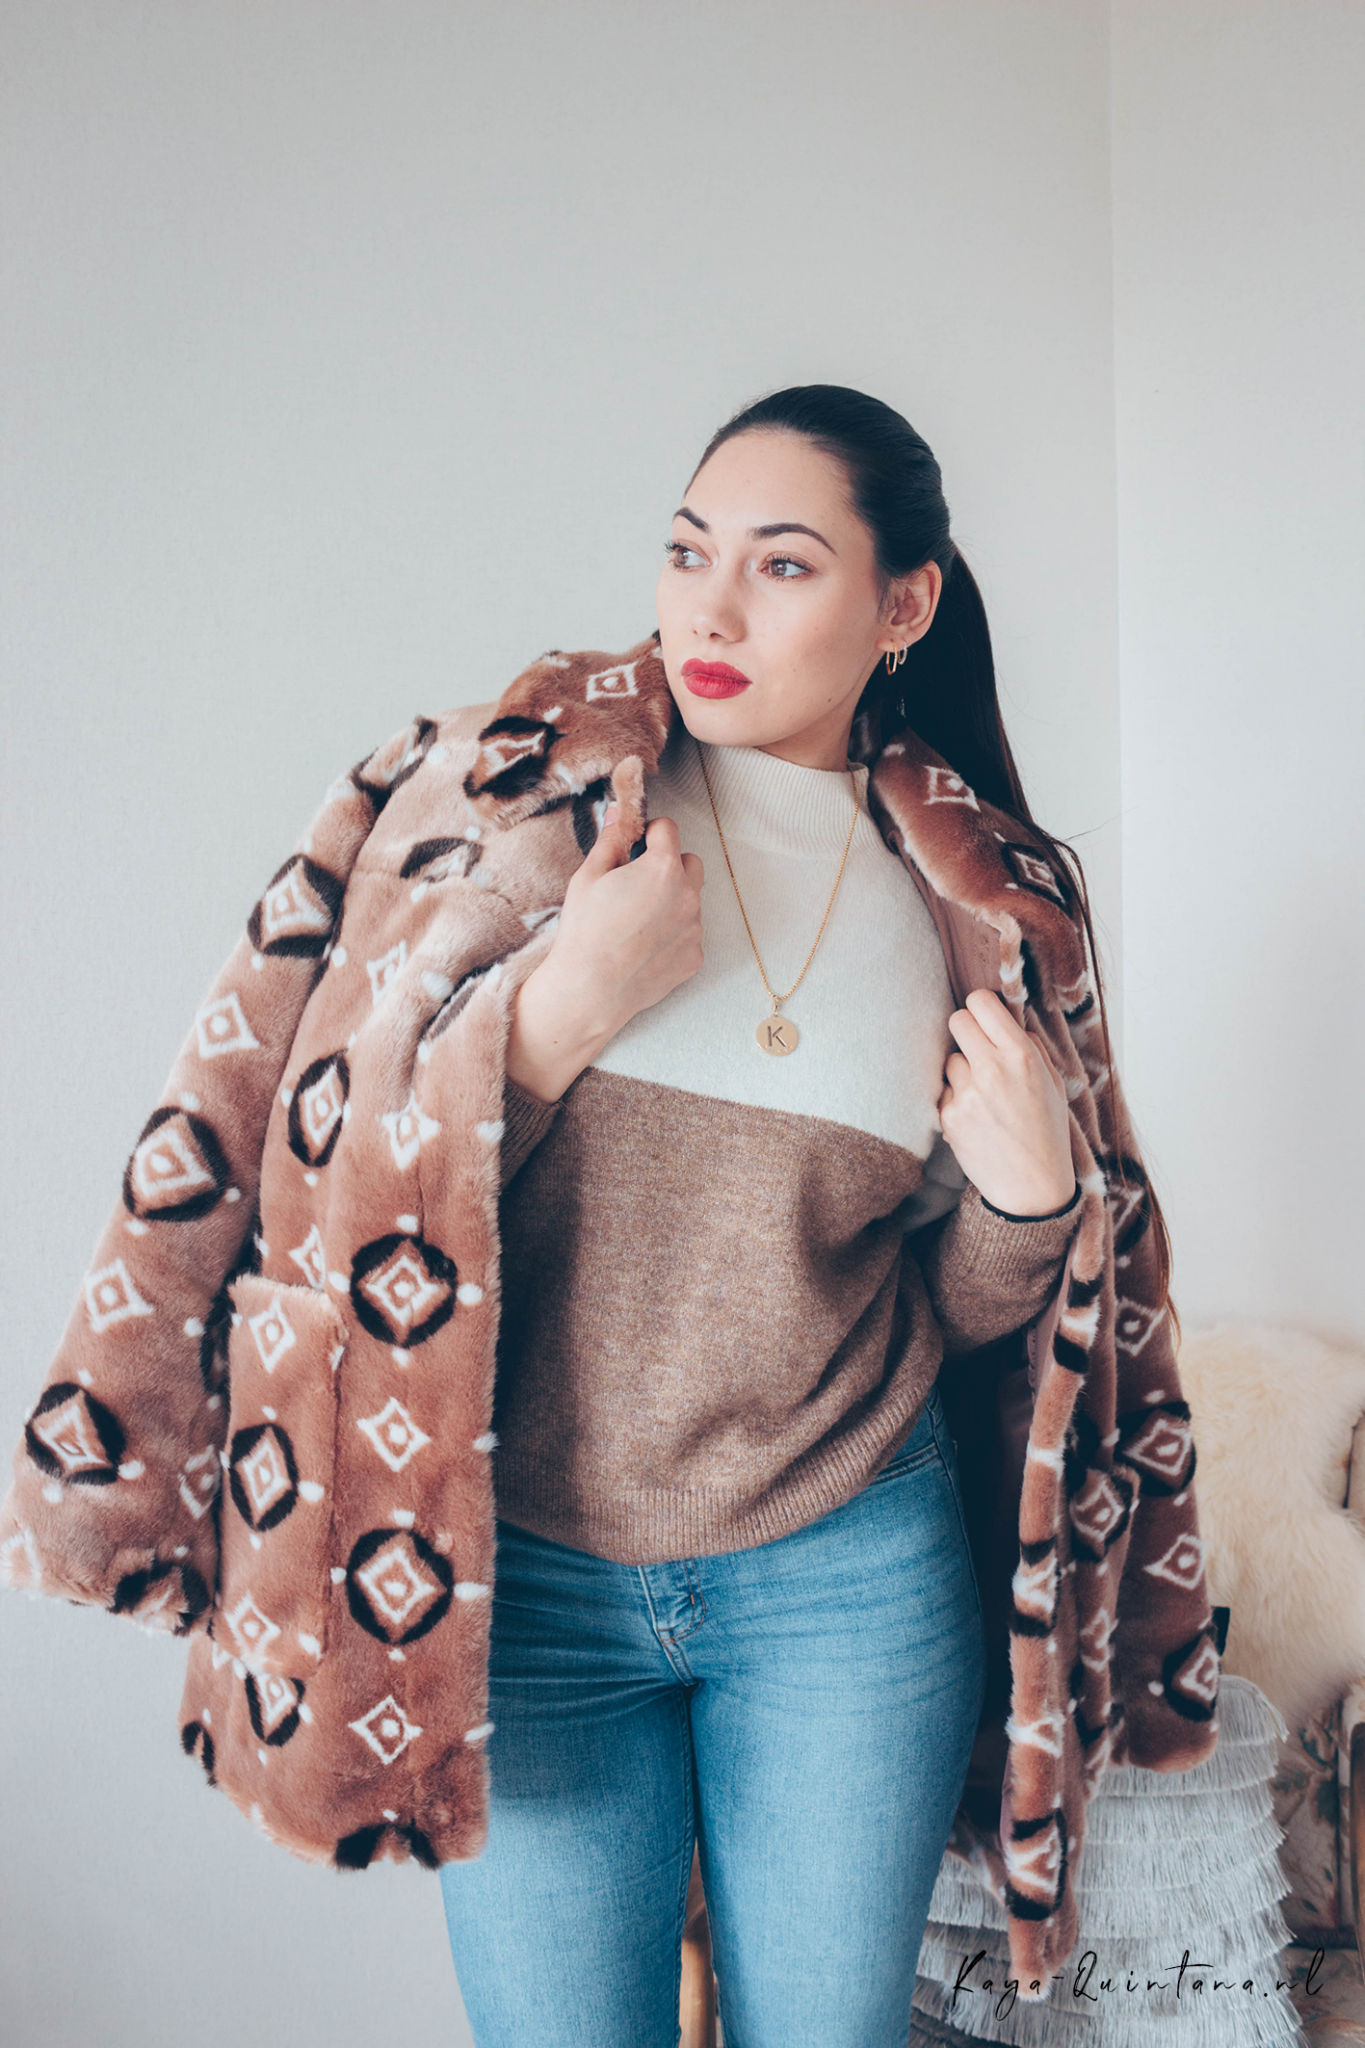                                                                            SEVENTIES STYLE FUR COAT OUTFIT                                                         SEVENTIES STYLE FUR COAT OUTFIT